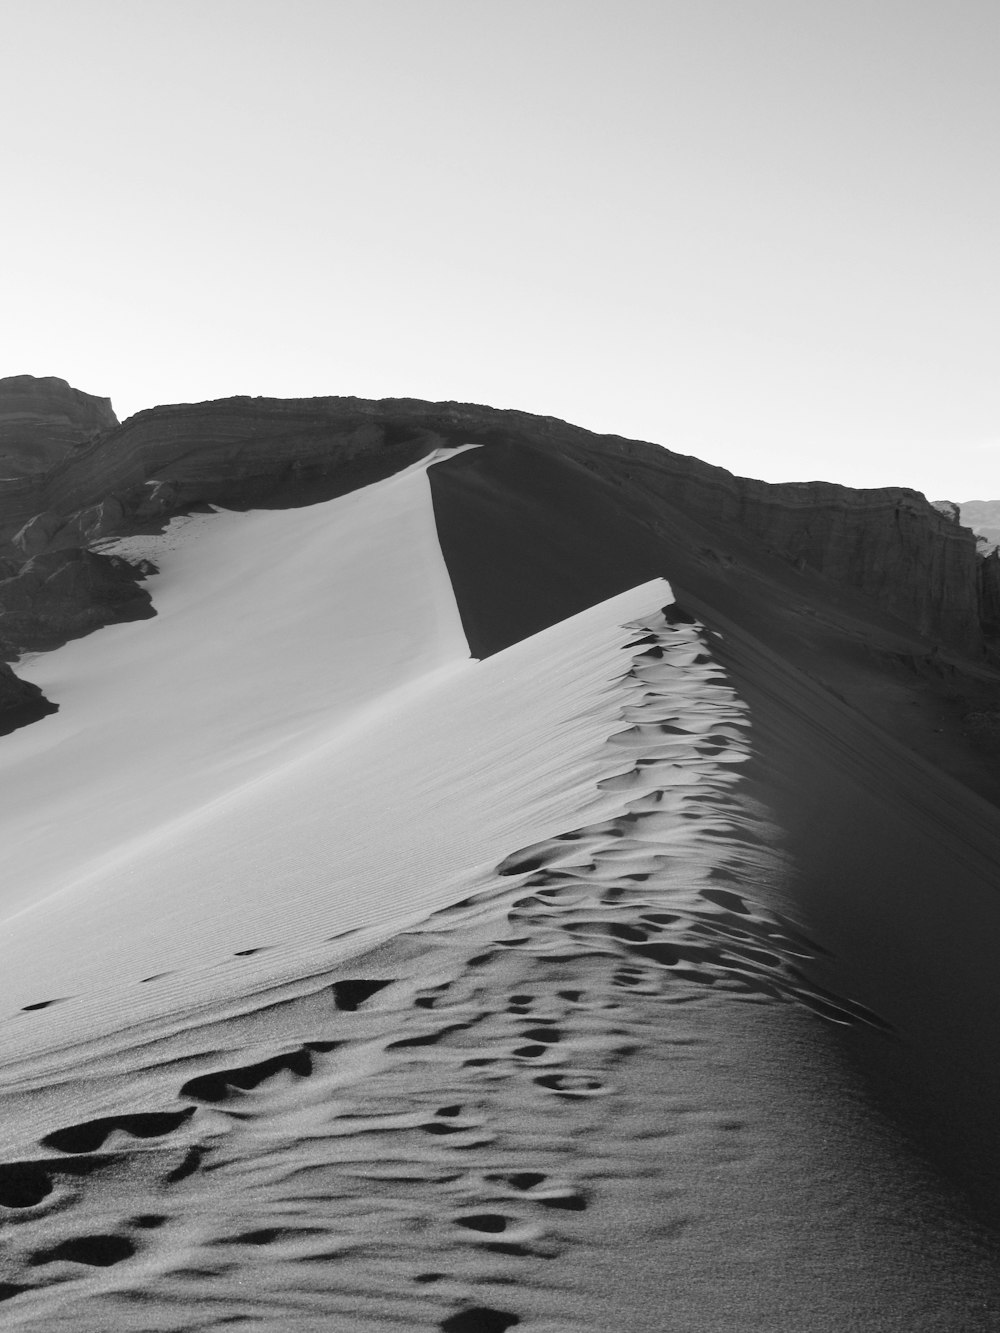 grayscale photography of footprints on desert mountain